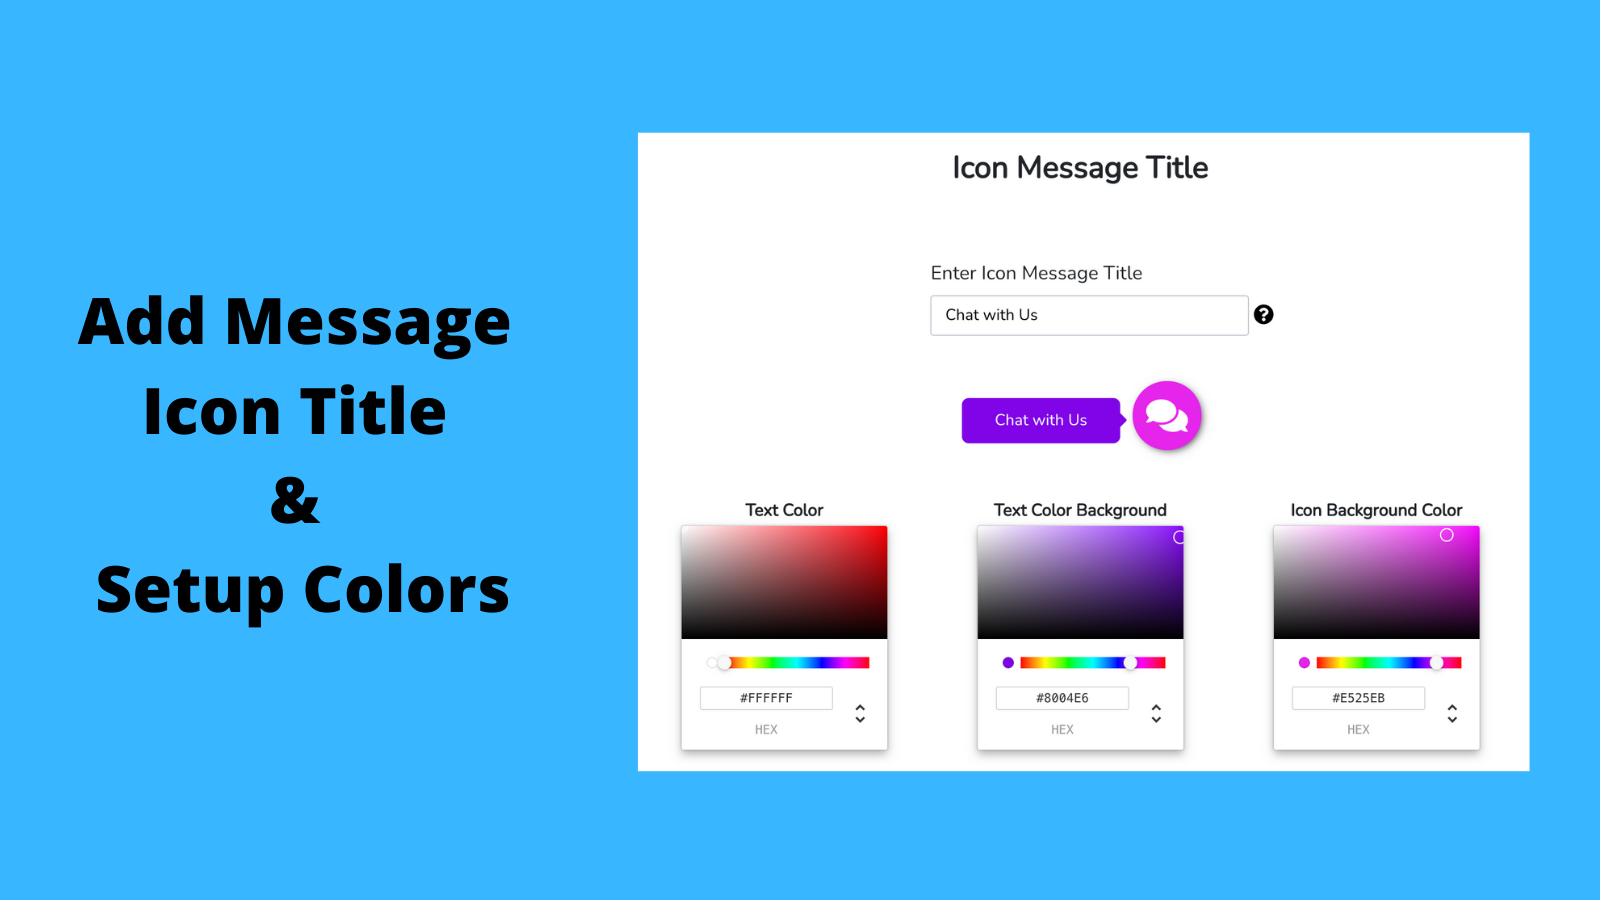 Add Message Icon Title and Setup Colors